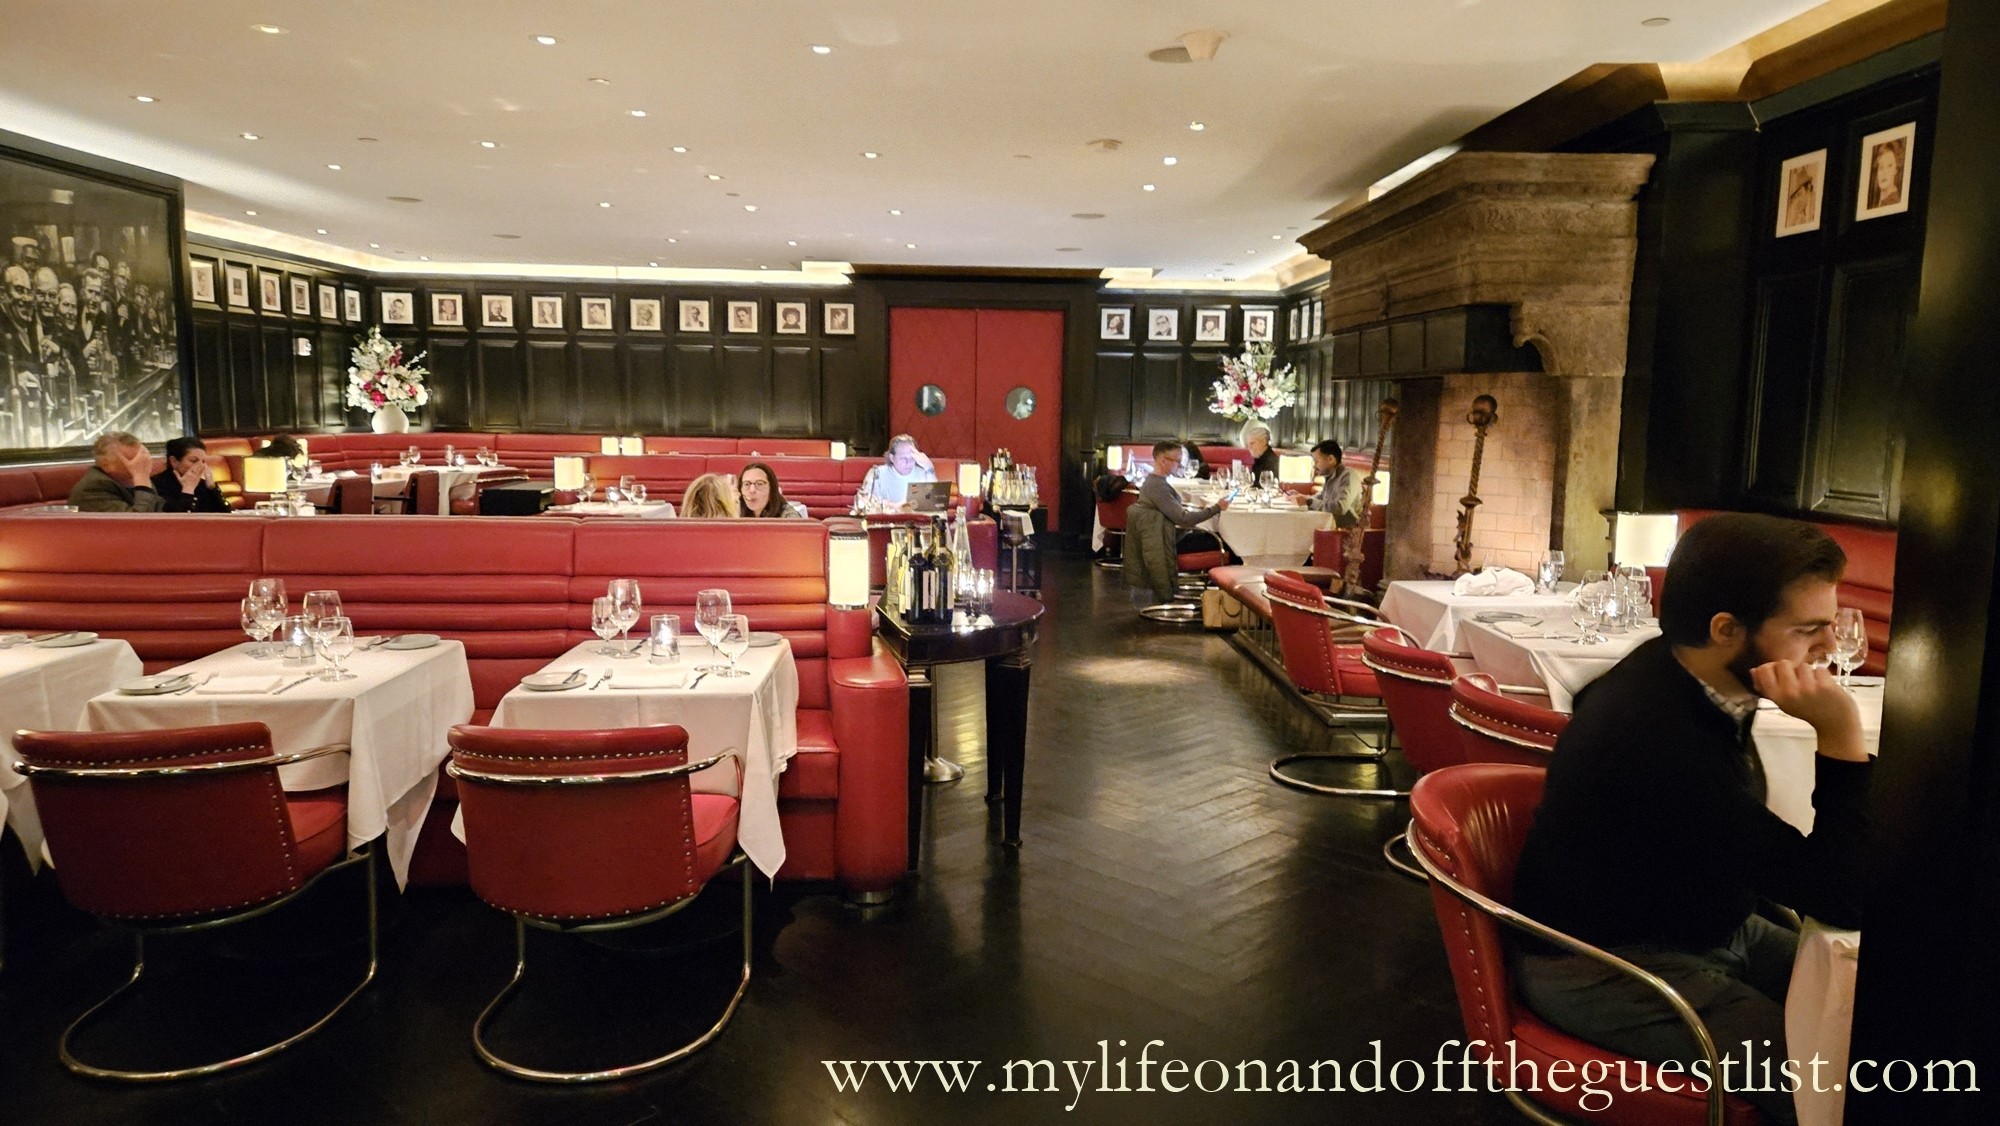 Restaurant Review: Pre-Theater Dining at The Lambs Club